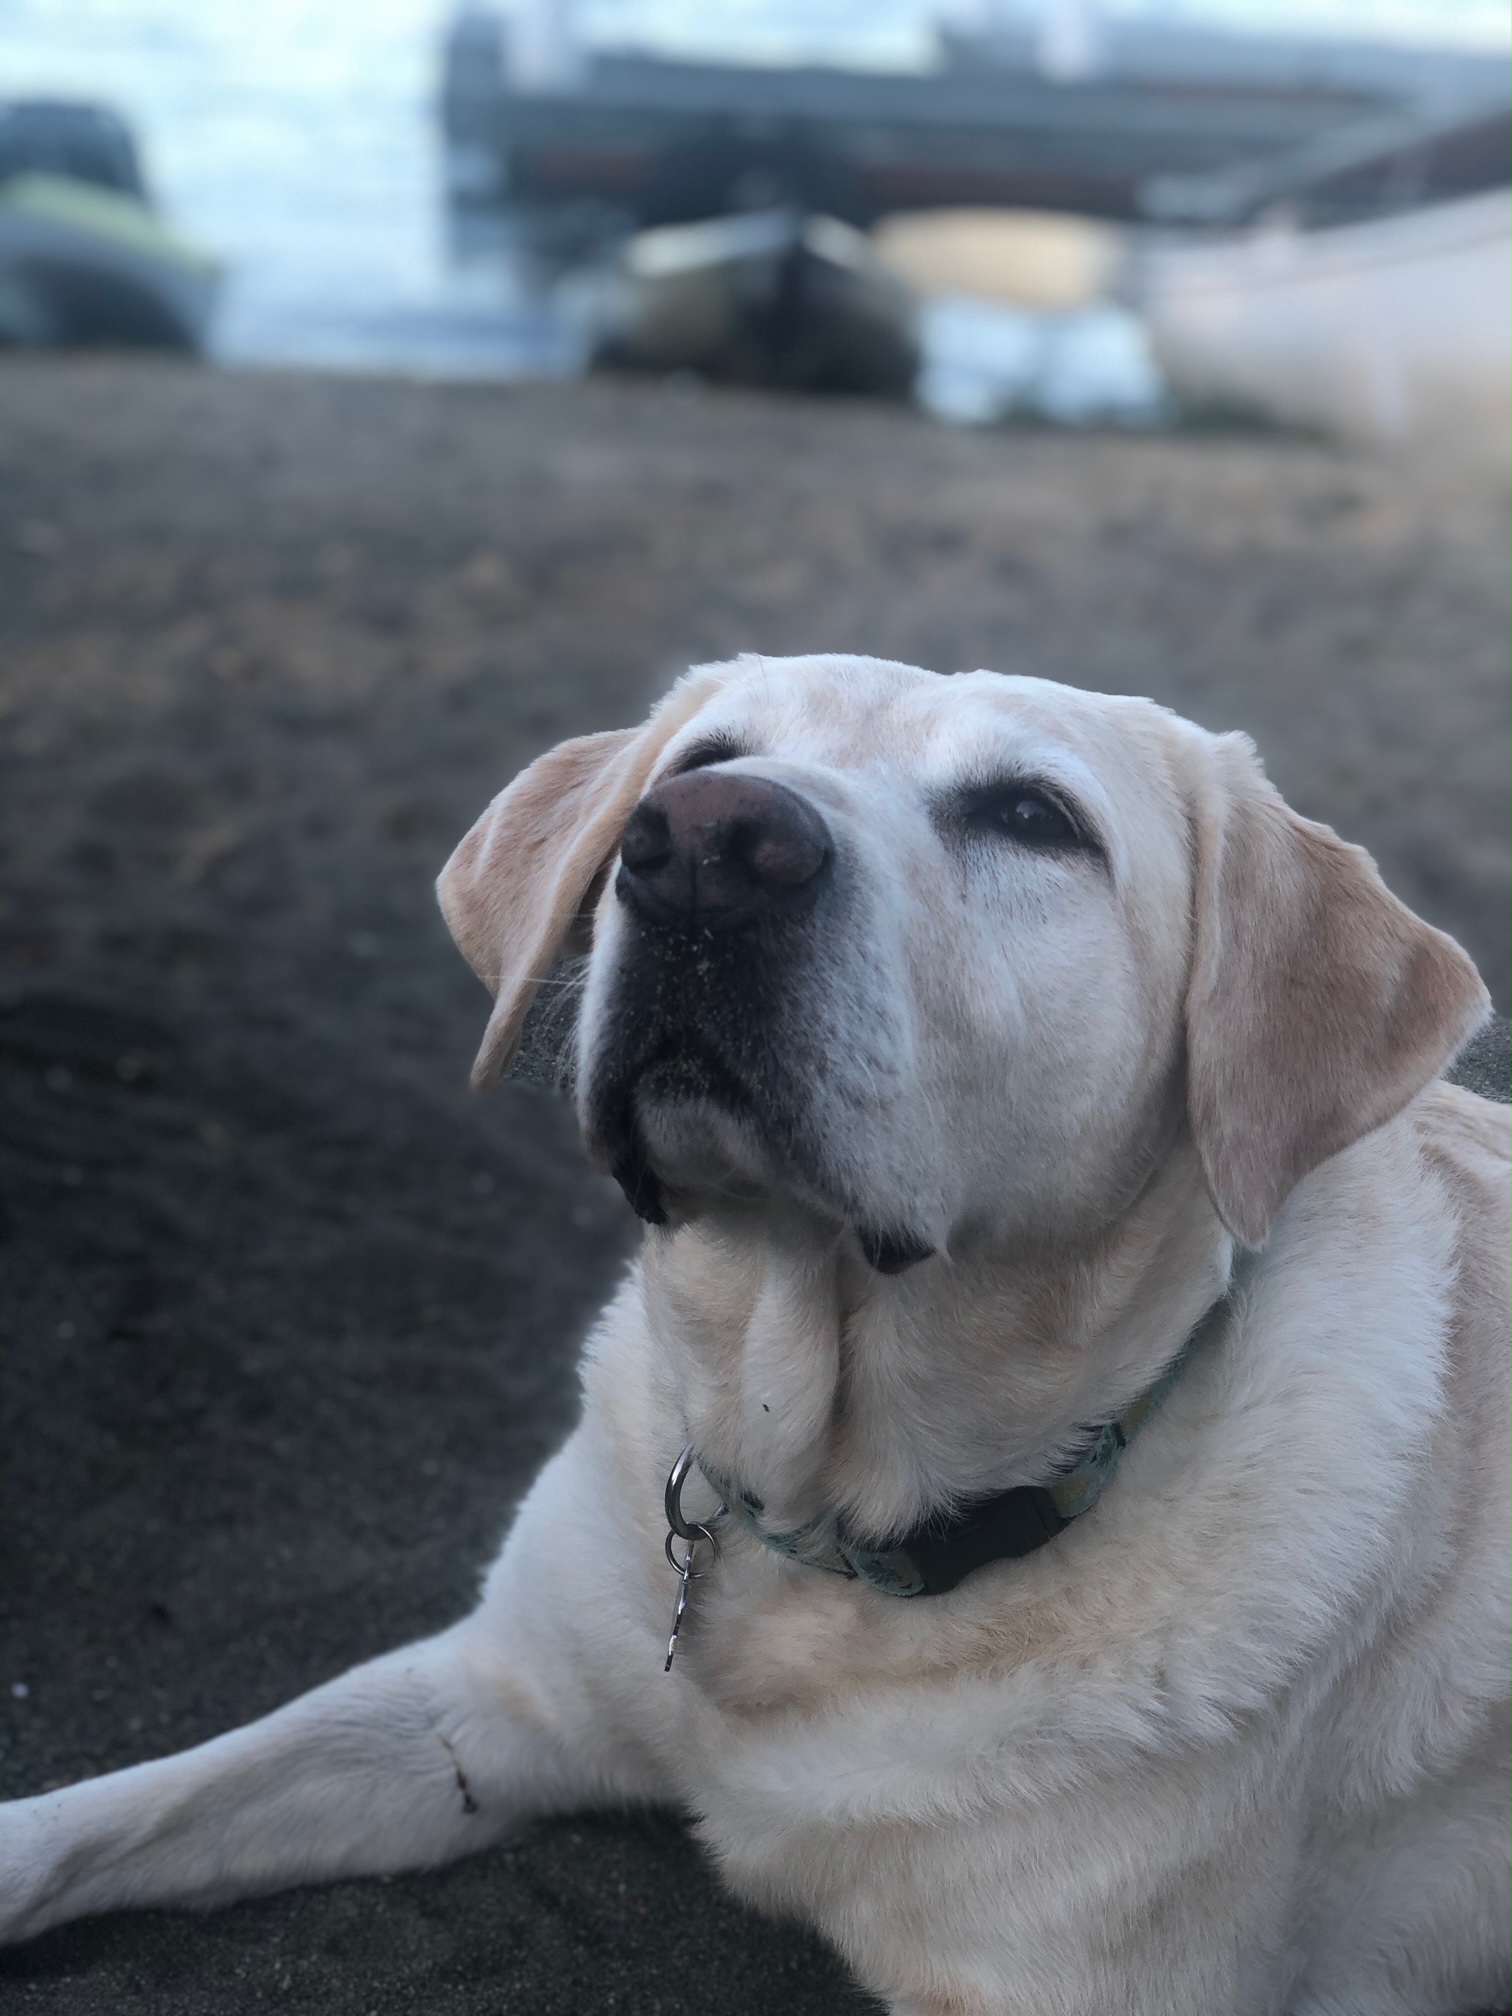 Can You Learn Financial Planning Tips from a Yellow Lab?